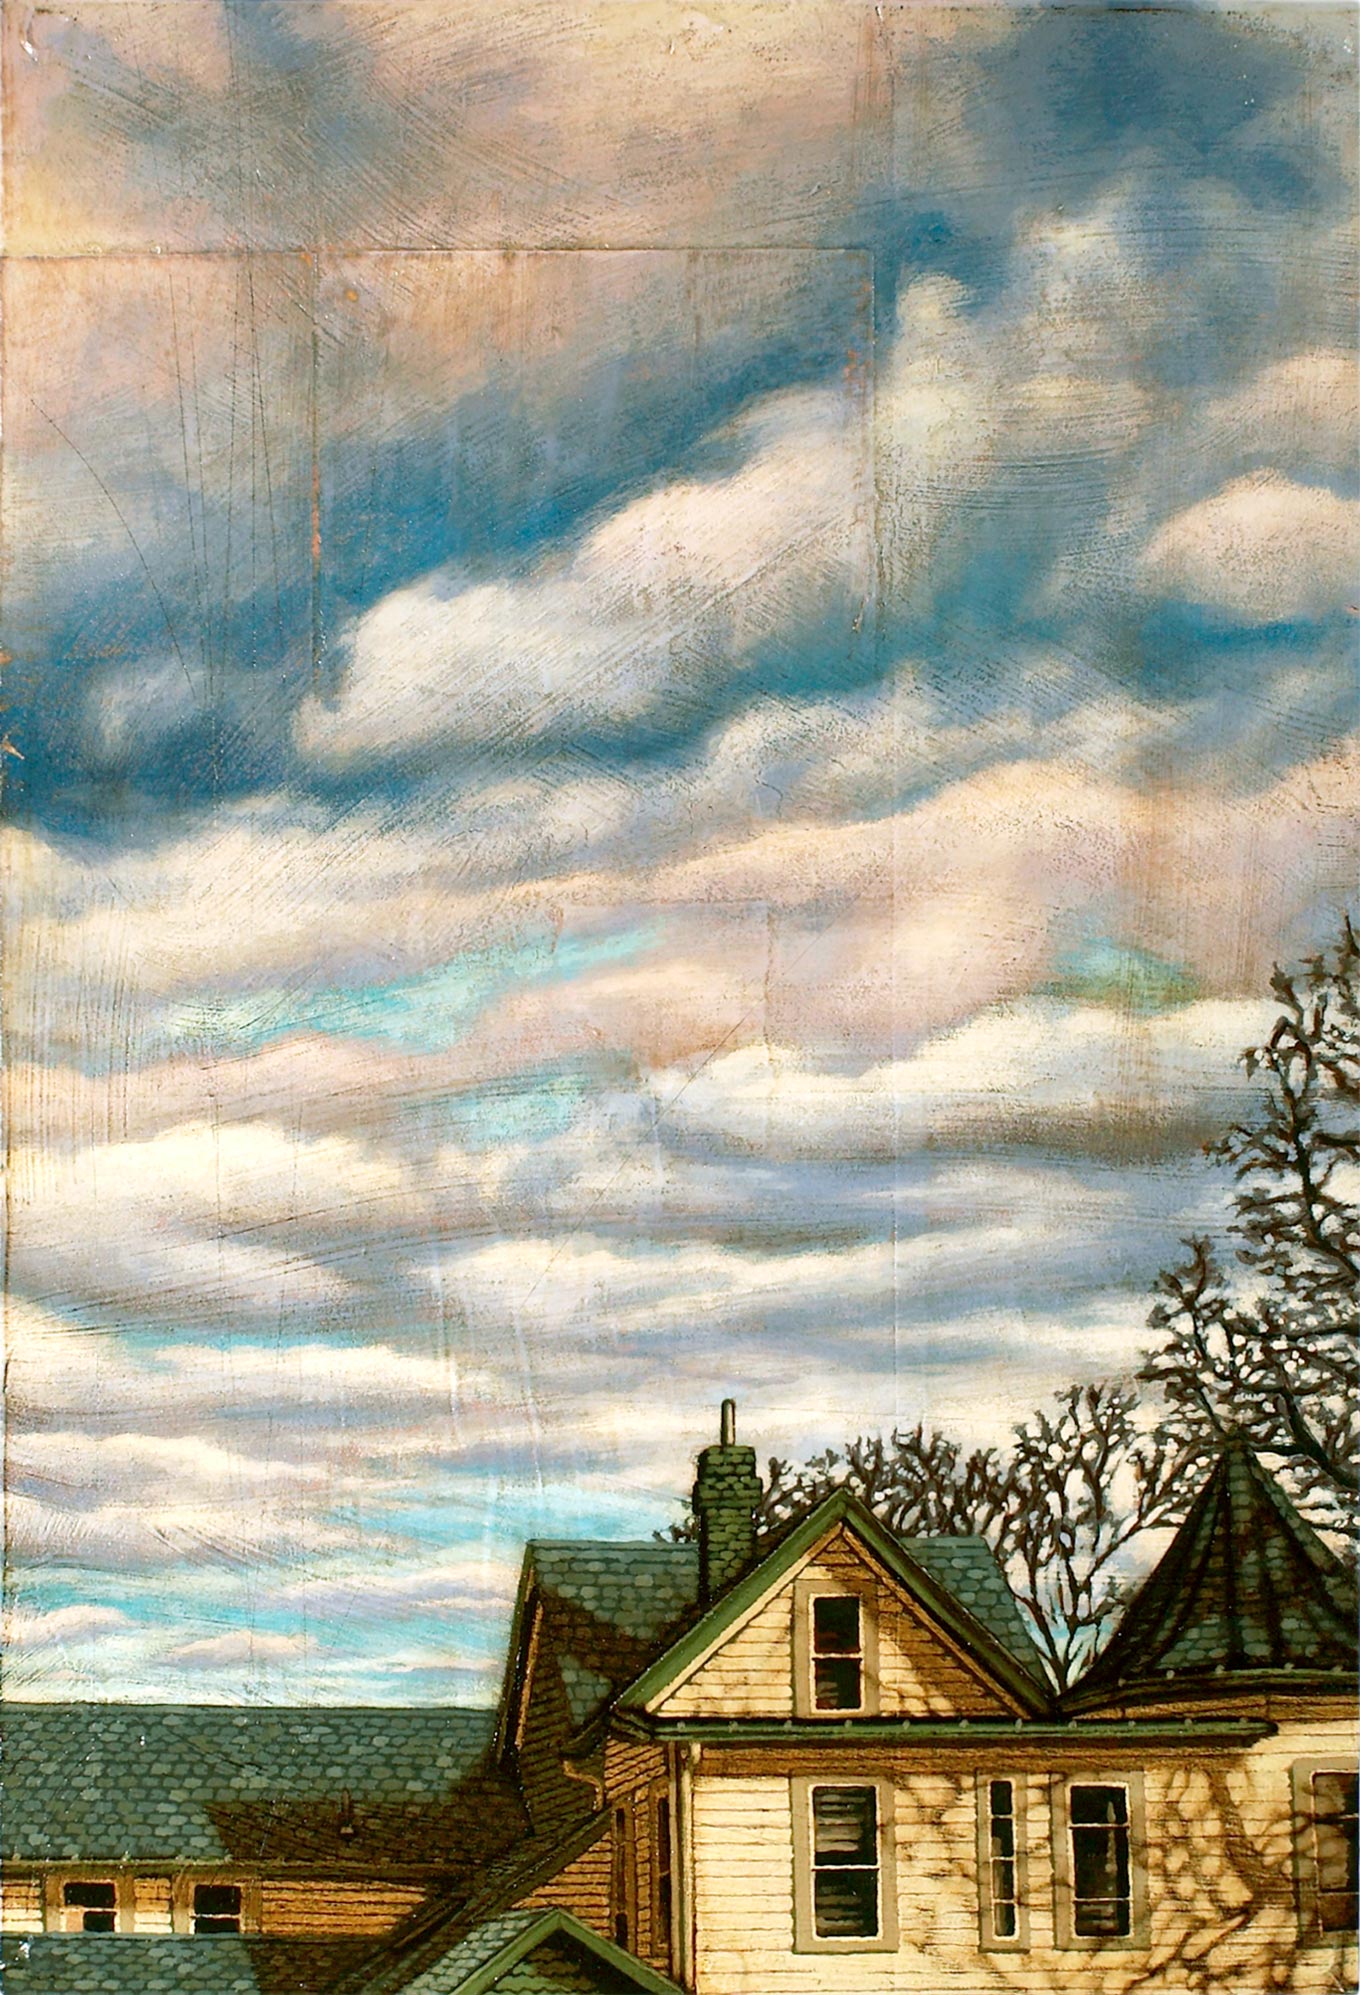    Home That Day   Mixed Media Painting 12.25in x 18.25in 